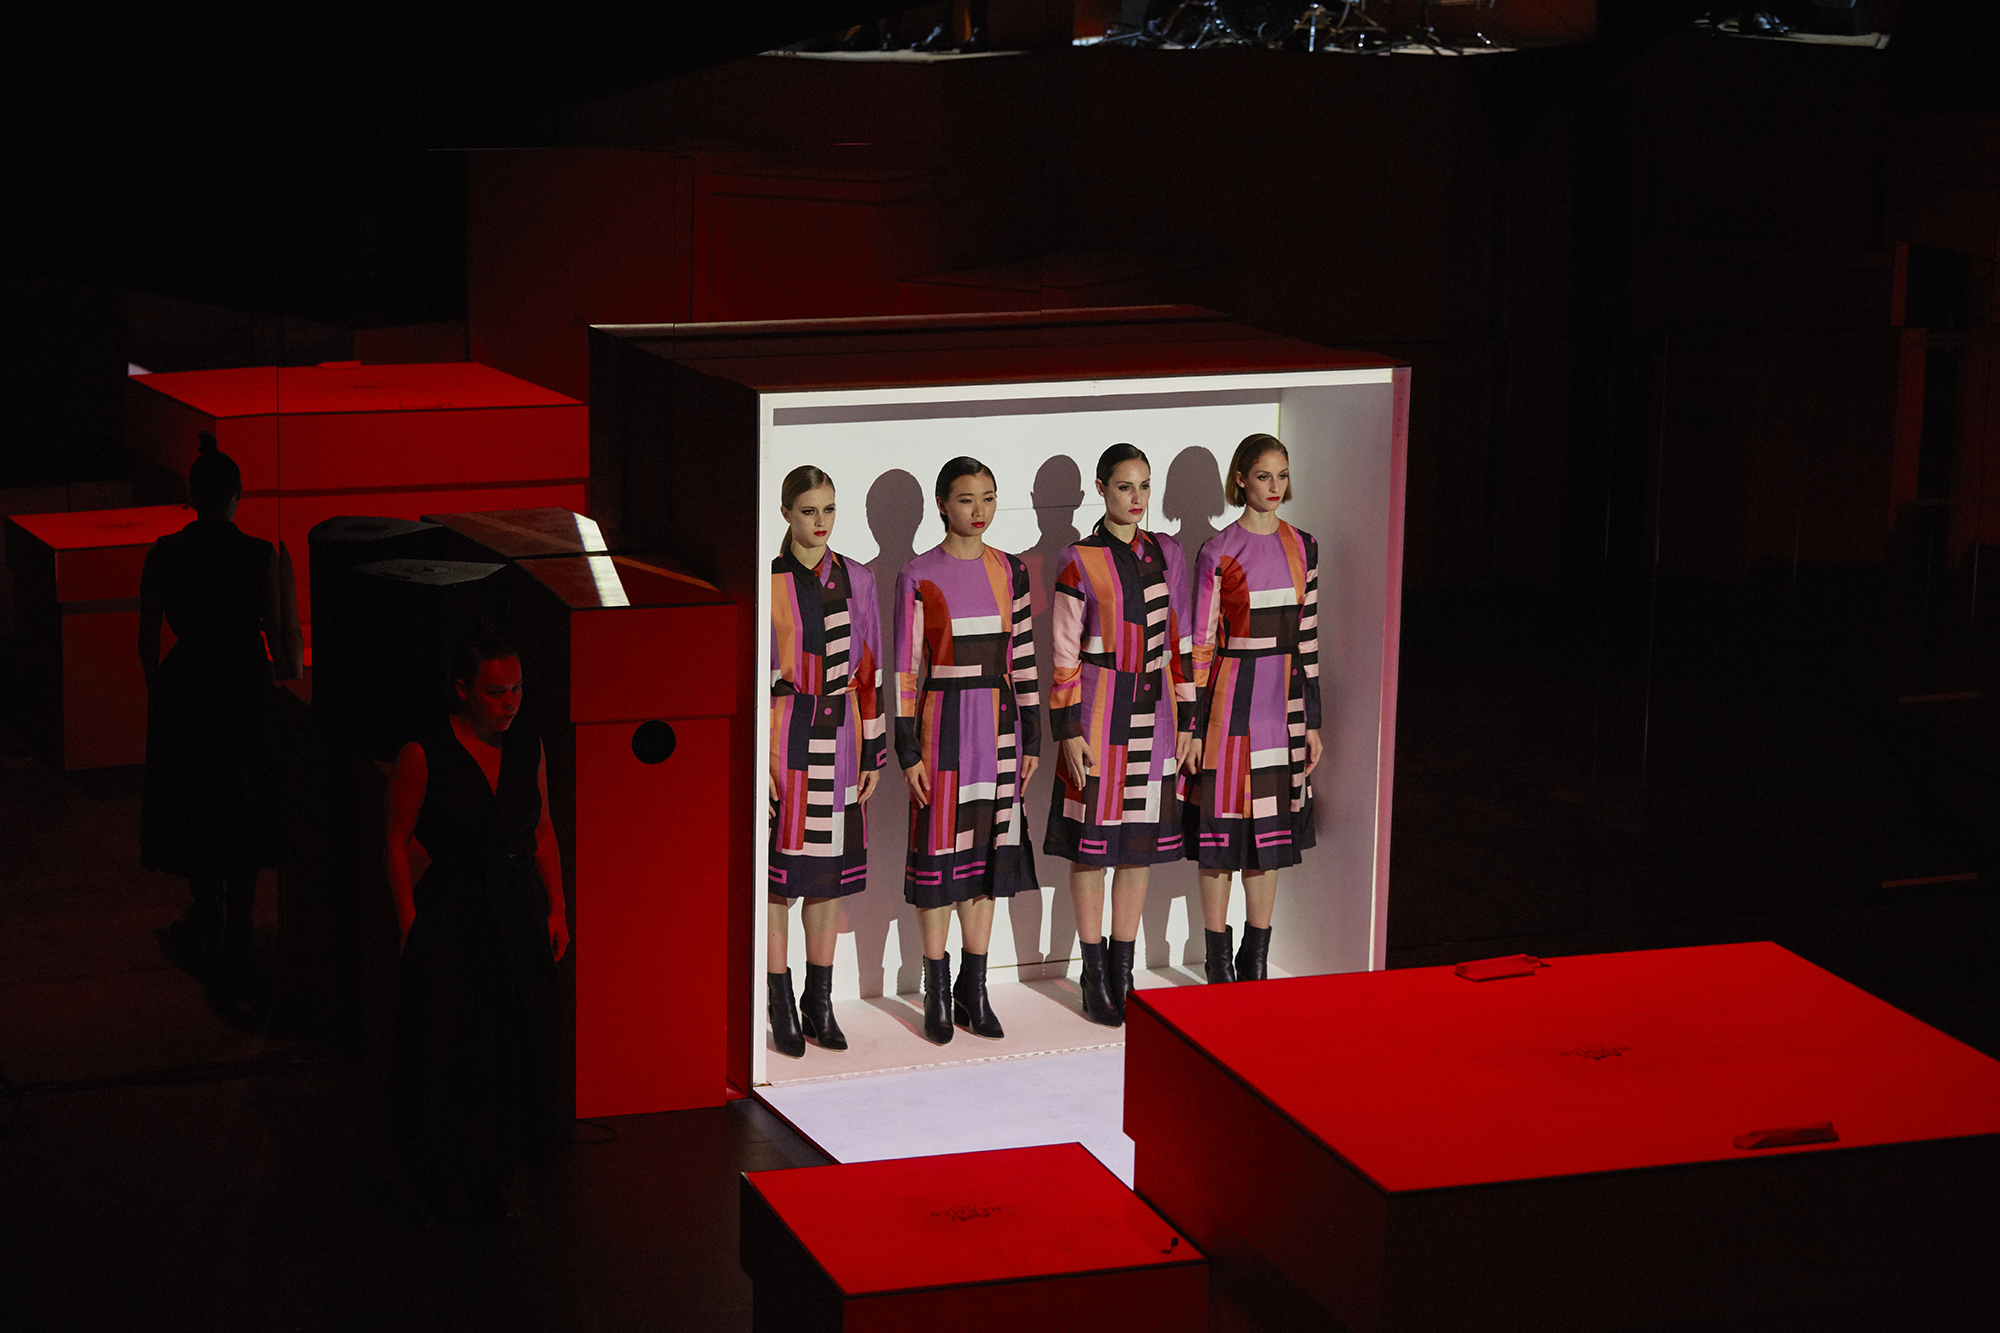 hermes-club-25-by-chris-rhodesthe-music-hall-performance-directed-by-jean-paul-goude-hermes-2017